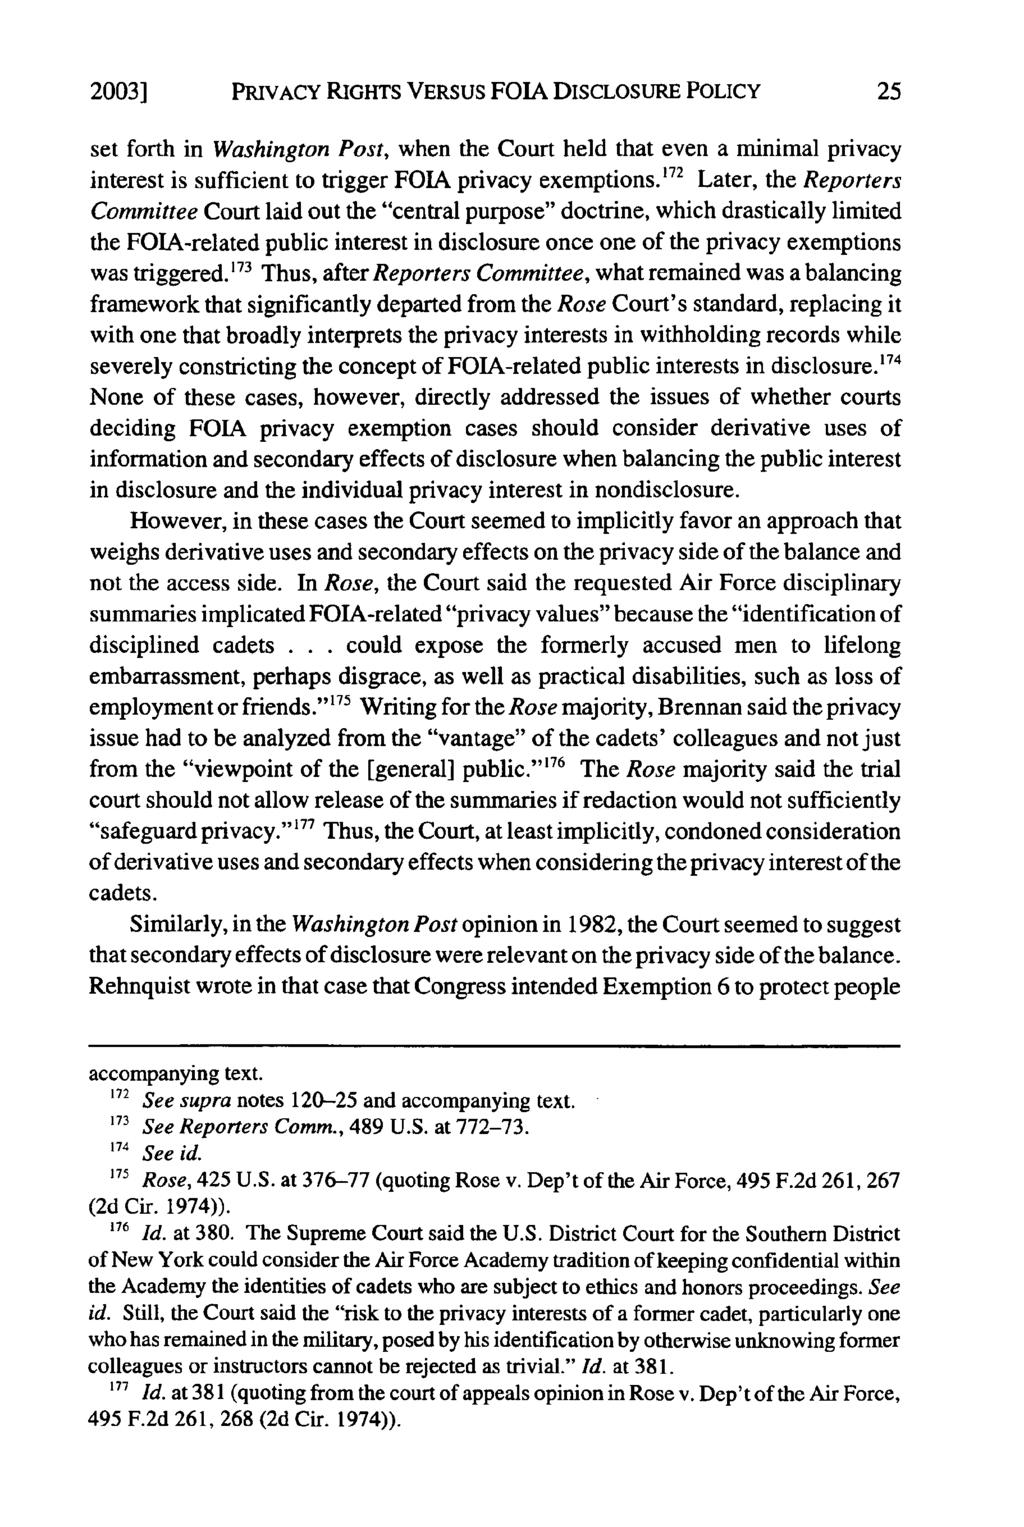 20031 PRIVACY RIGHTS VERSUS FOIA DISCLOSURE POLICY set forth in Washington Post, when the Court held that even a minimal privacy interest is sufficient to trigger FOIA privacy exemptions.